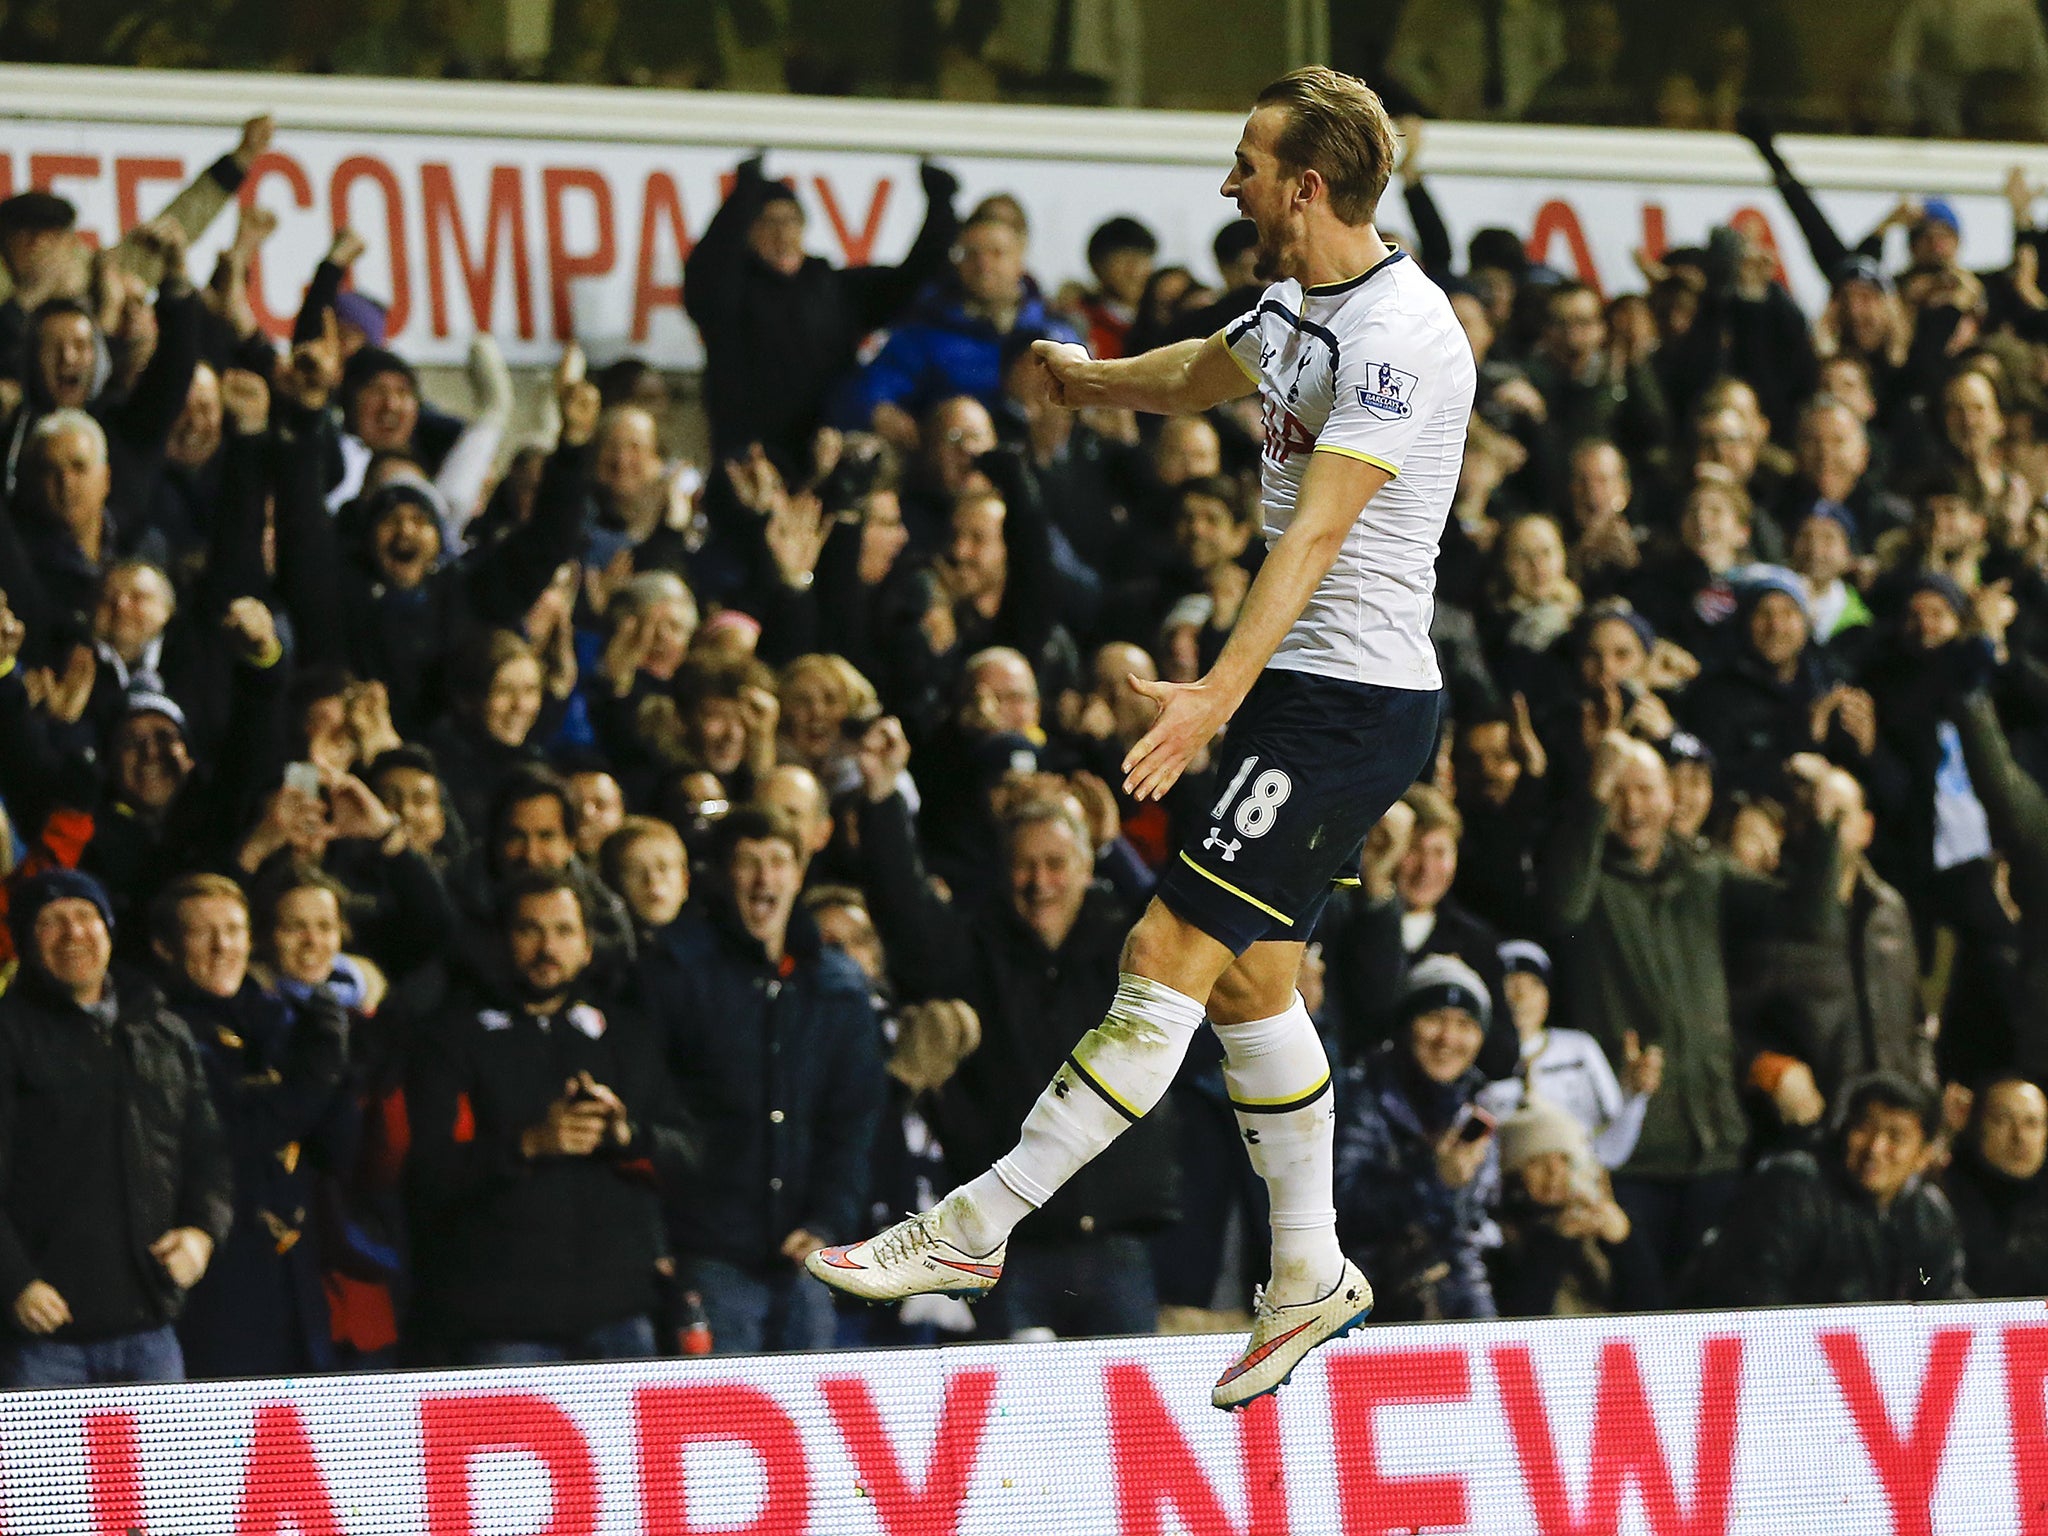 Harry Kane scored twice in Tottenham’s 5-3 victory over Chelsea on New Year’s Day